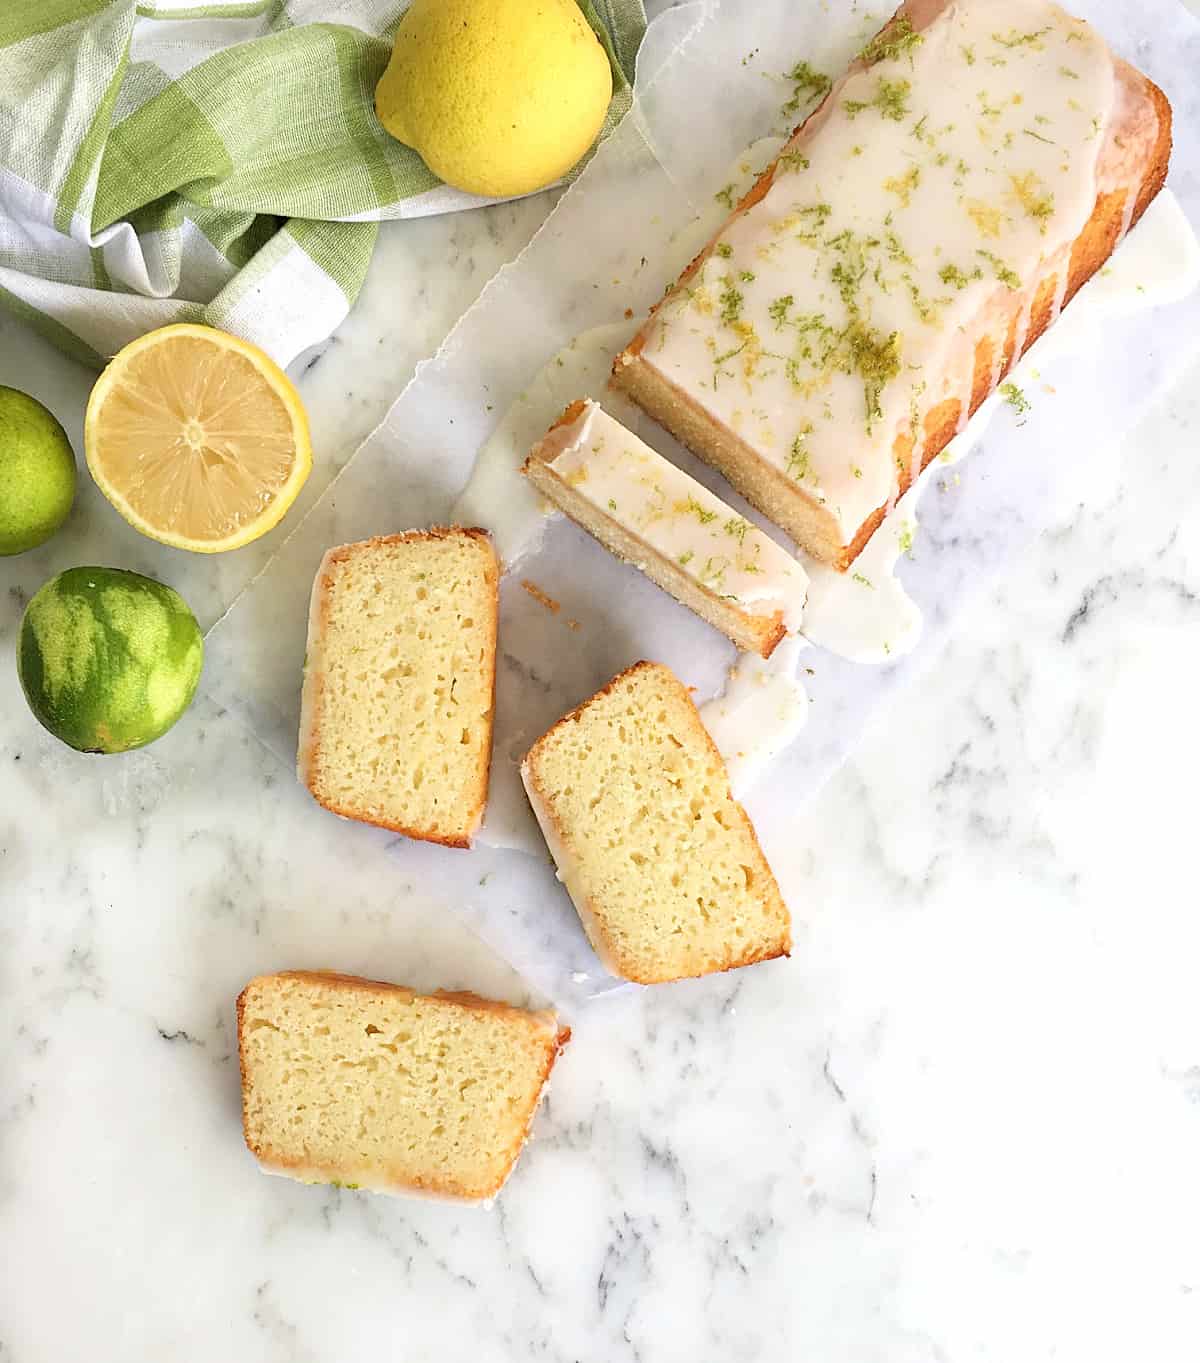 Overview of cut loaf cake, three slices, lemons and limes around, marble surface